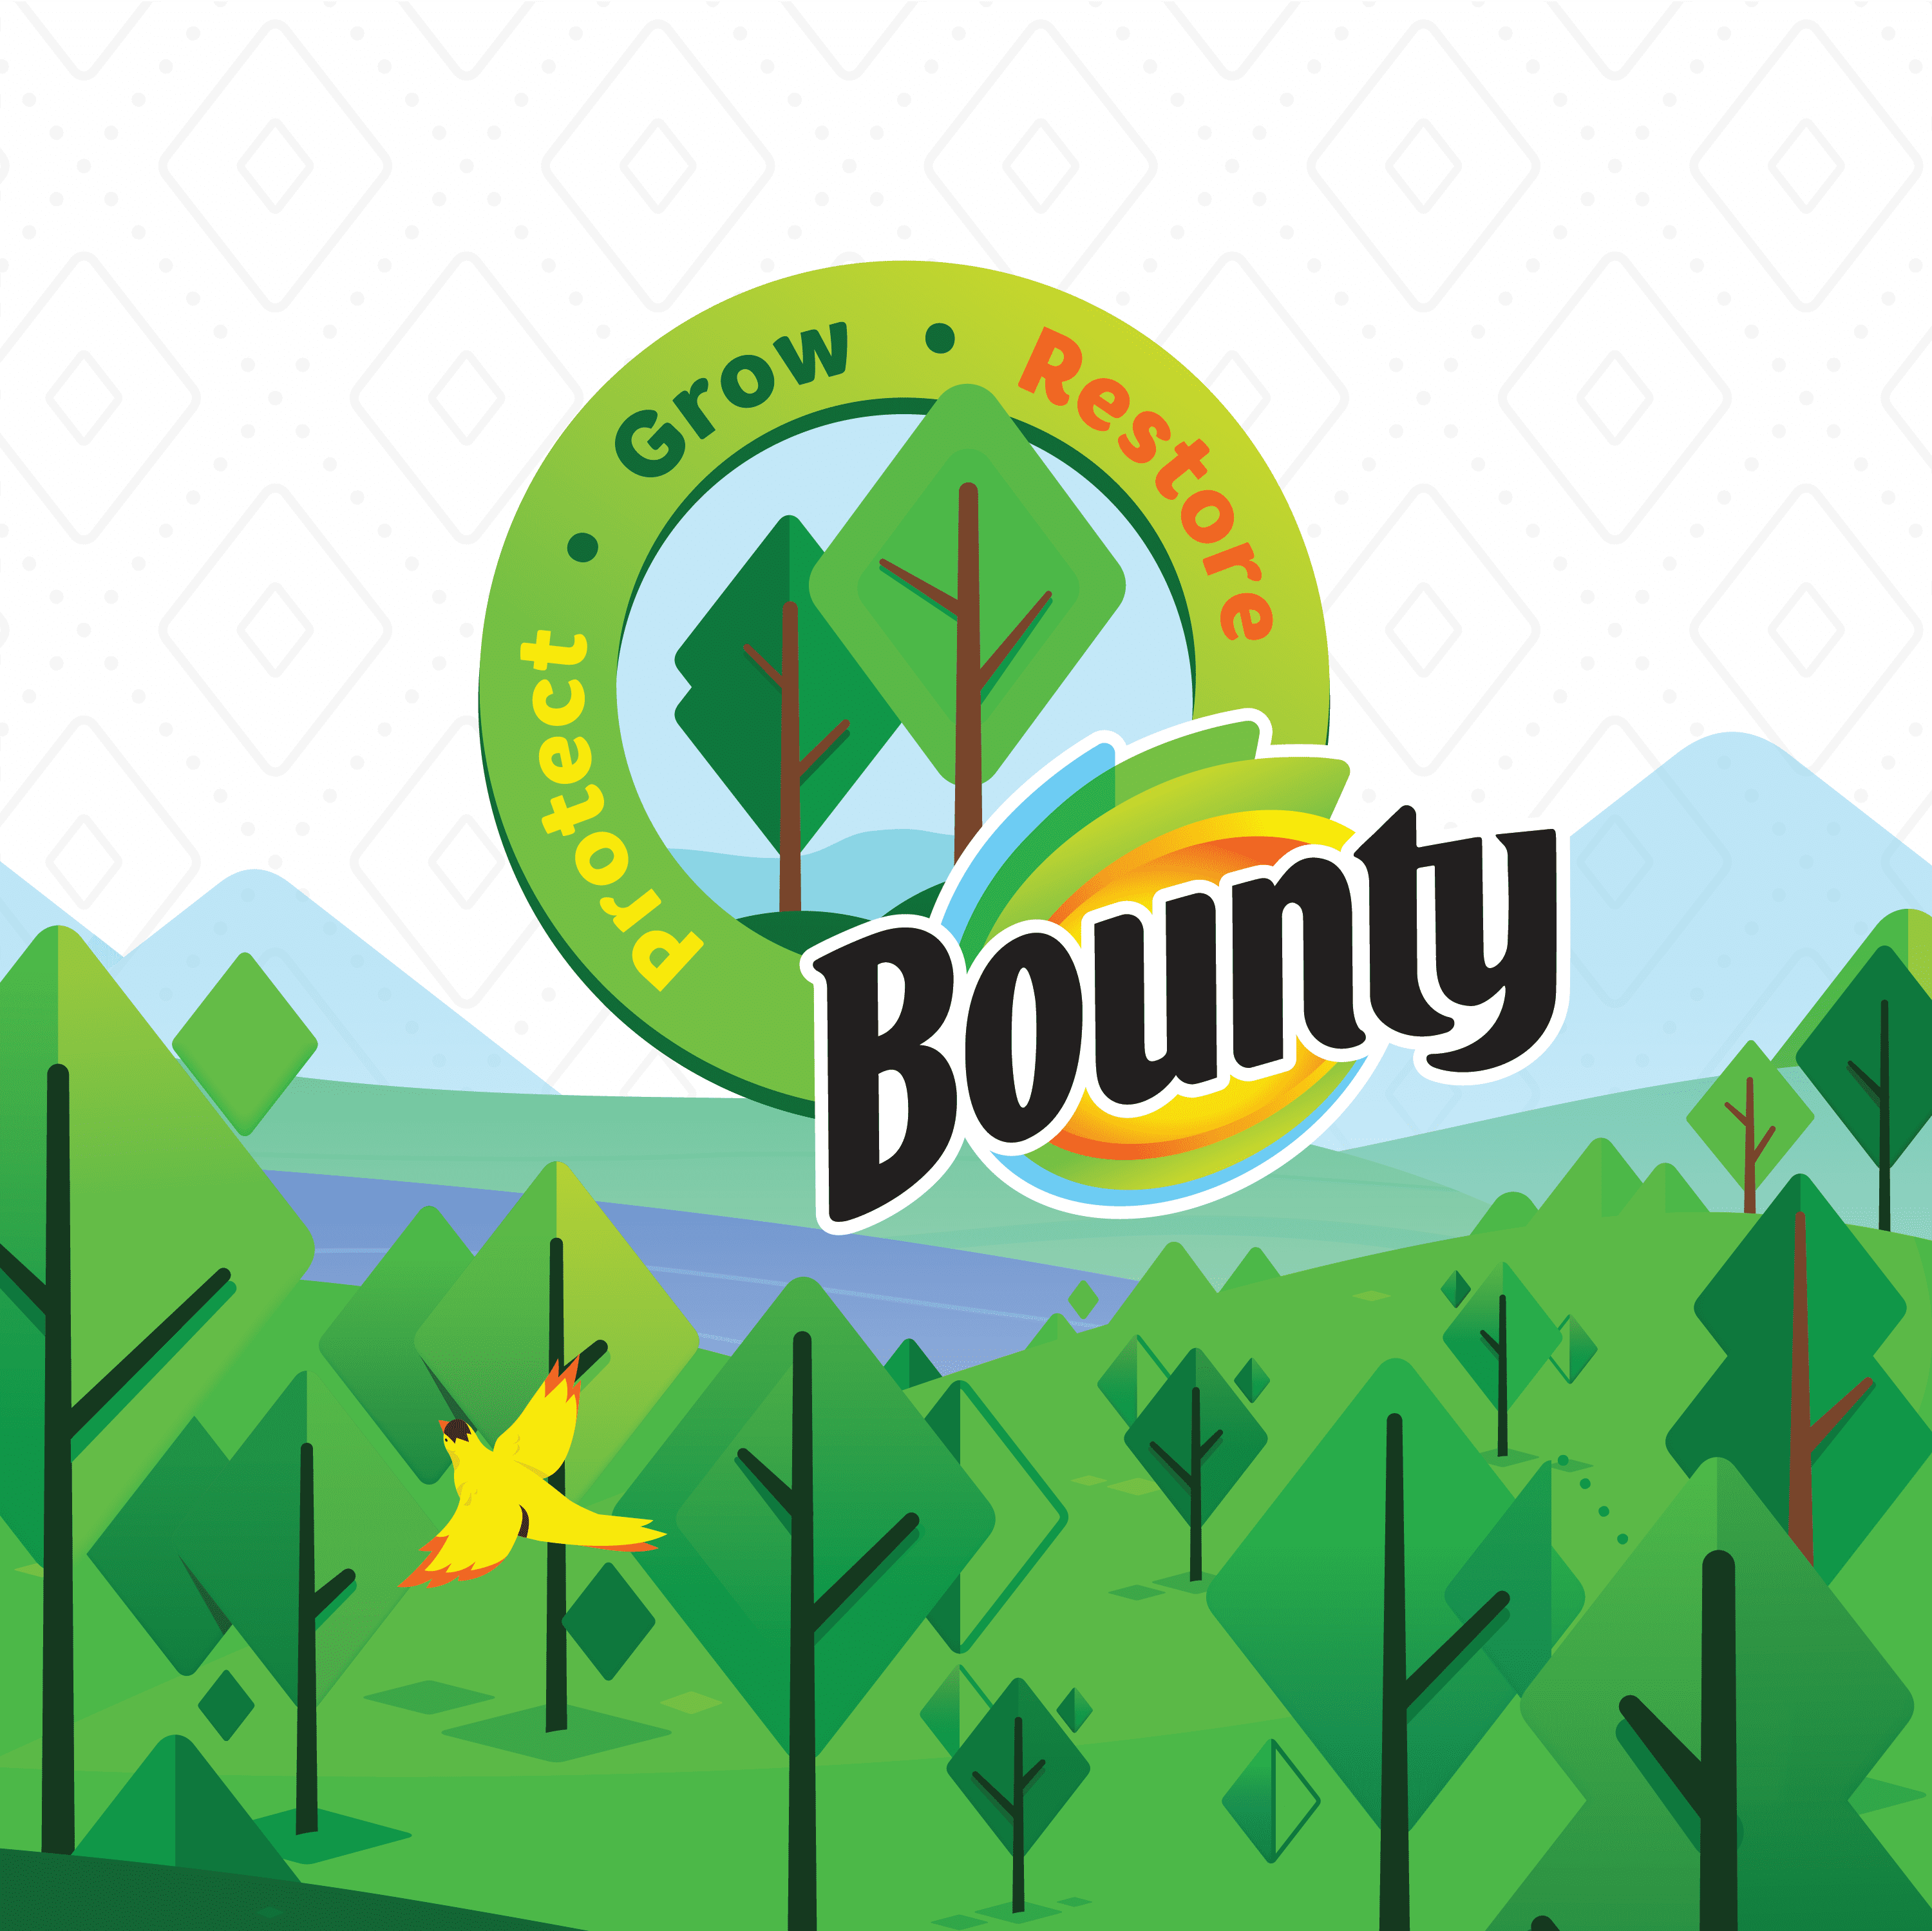 Bounty Select-A-Size Paper Towels, 1 Count – BevMo!